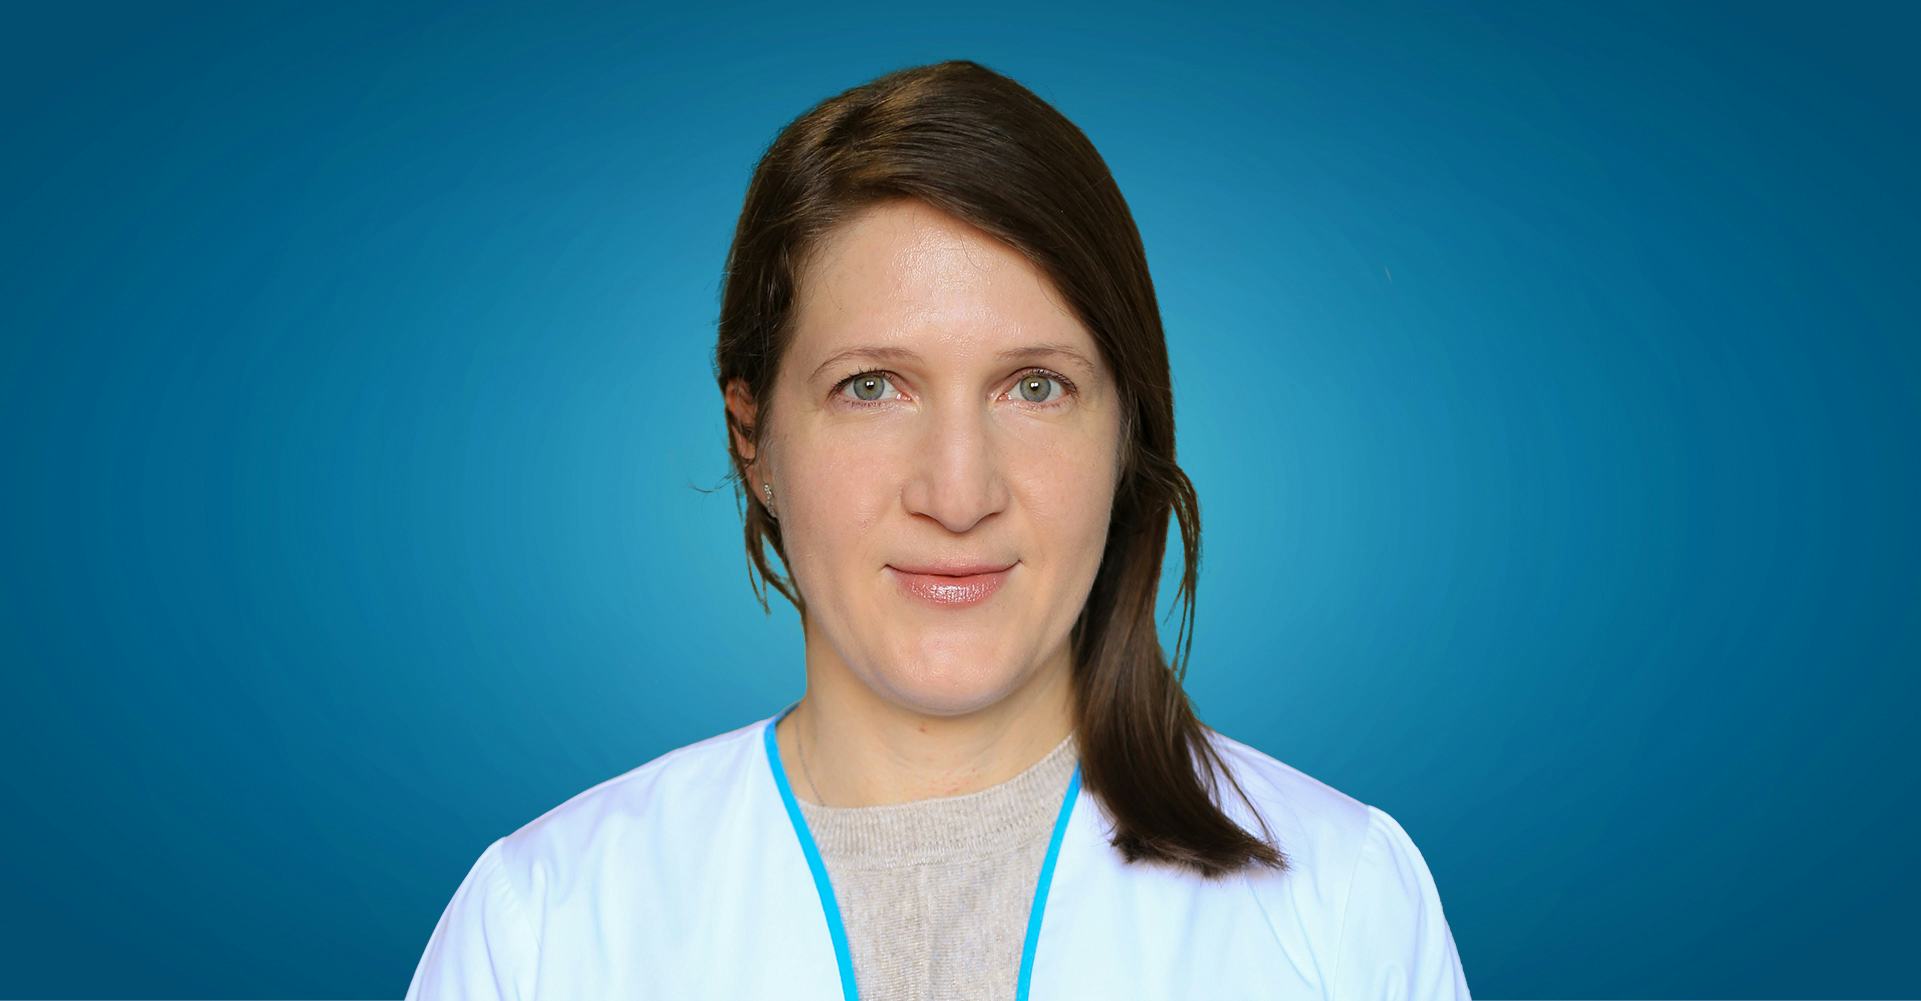 Dr. Andreea Mihale